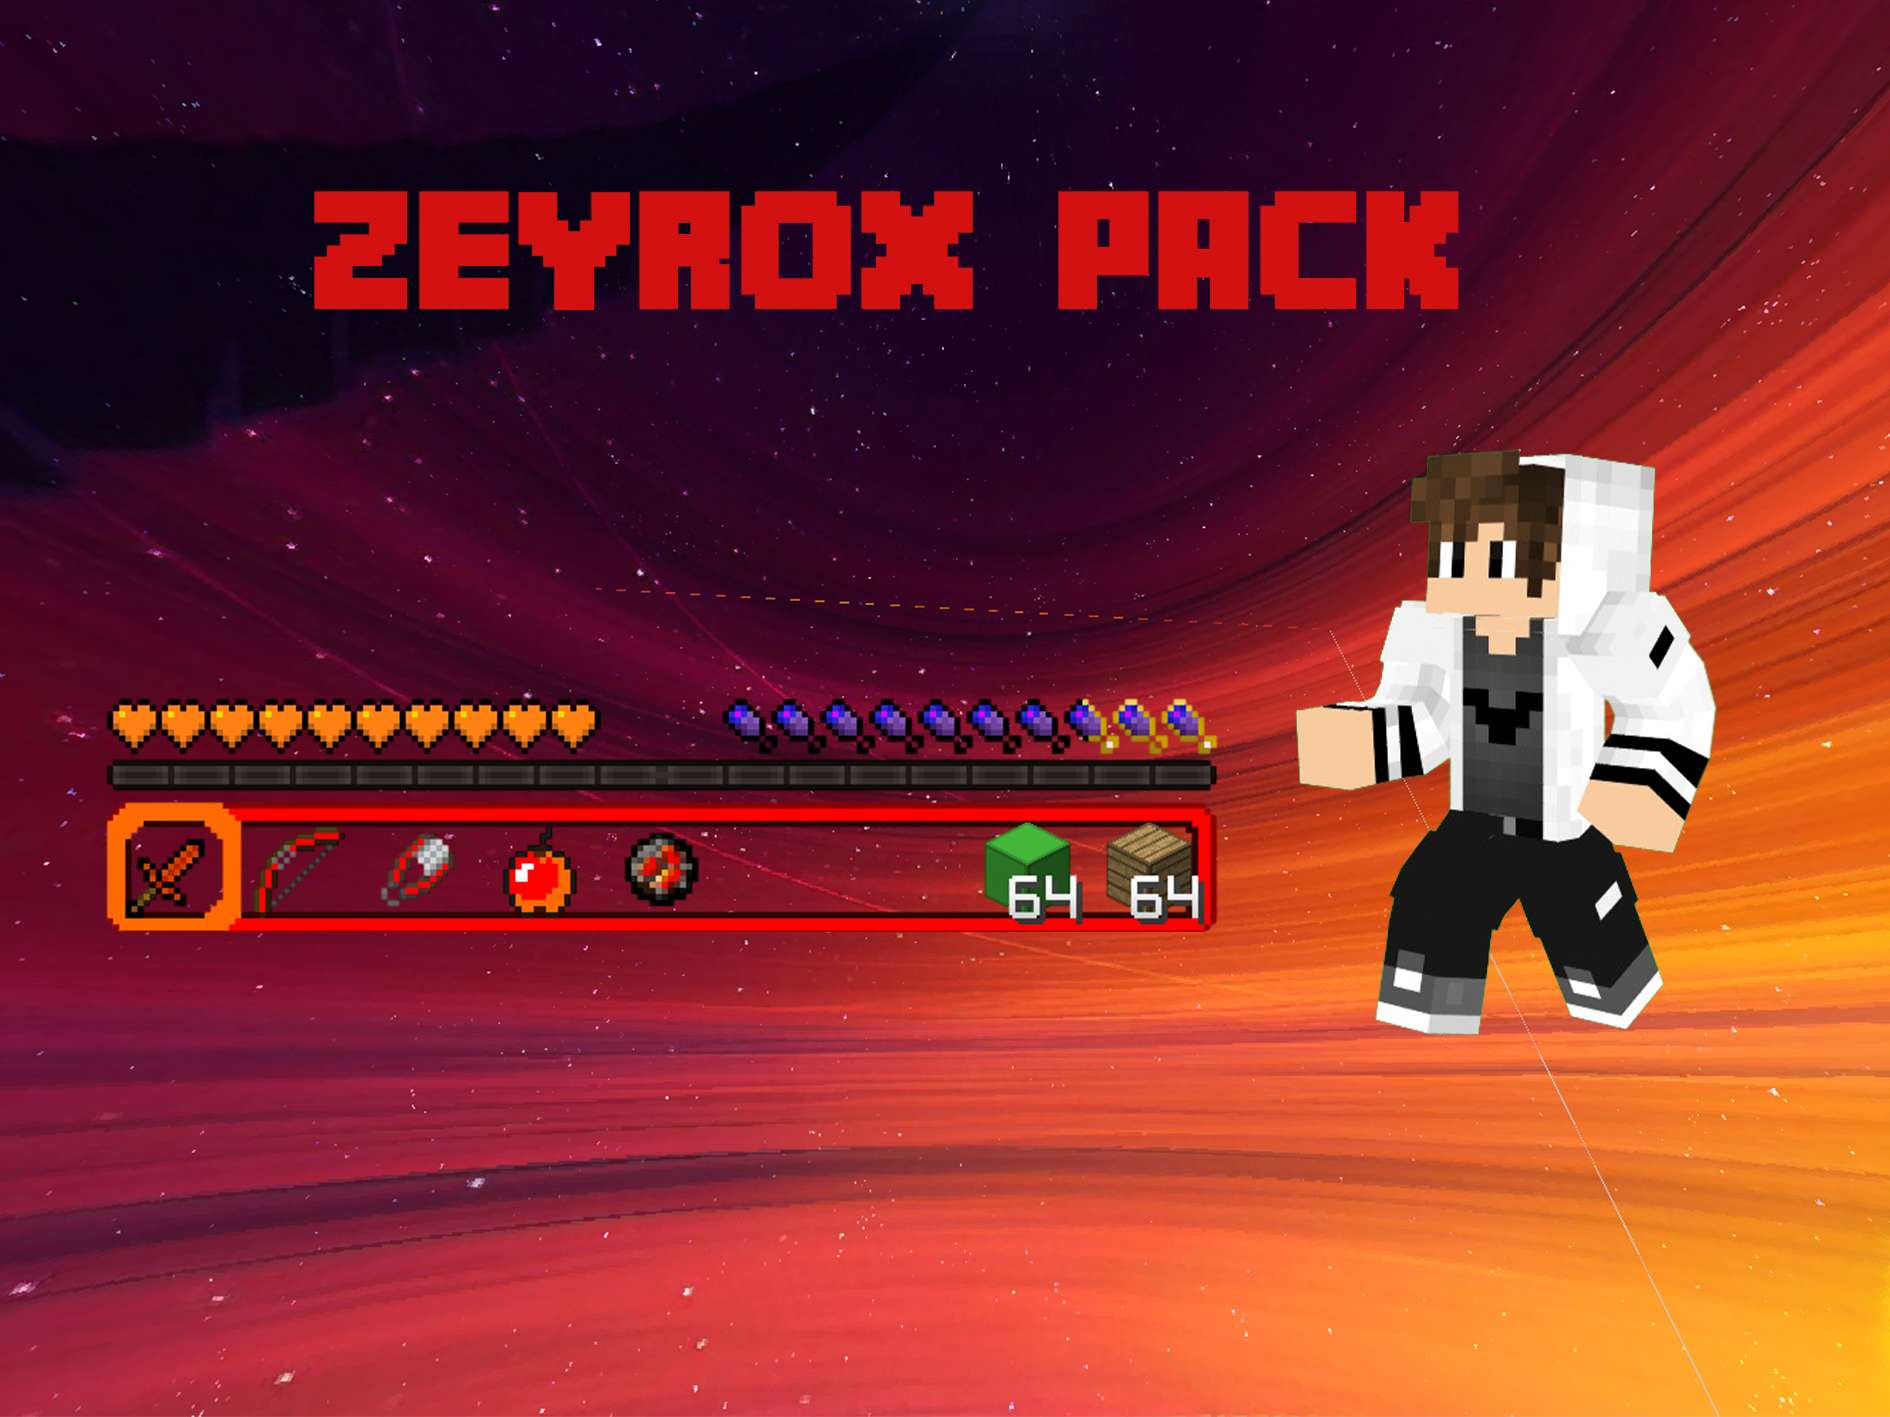 Gallery Banner for Zeyrox Pack on PvPRP